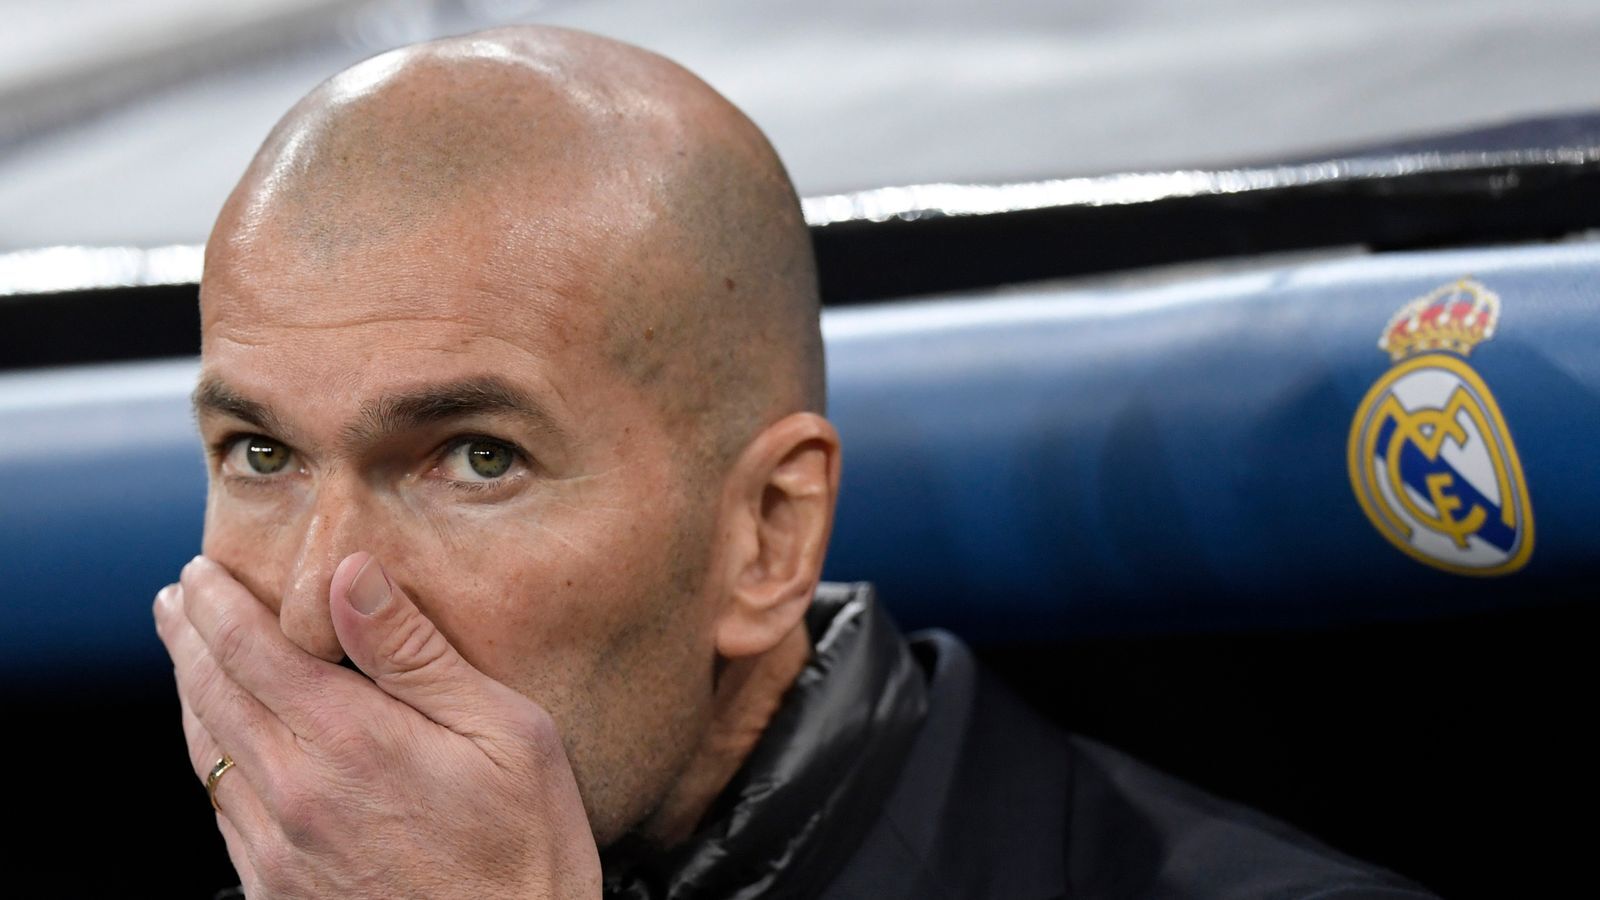 Zidane Finishes 200 Games as the Real Madrid Coach in a Match against Éibar